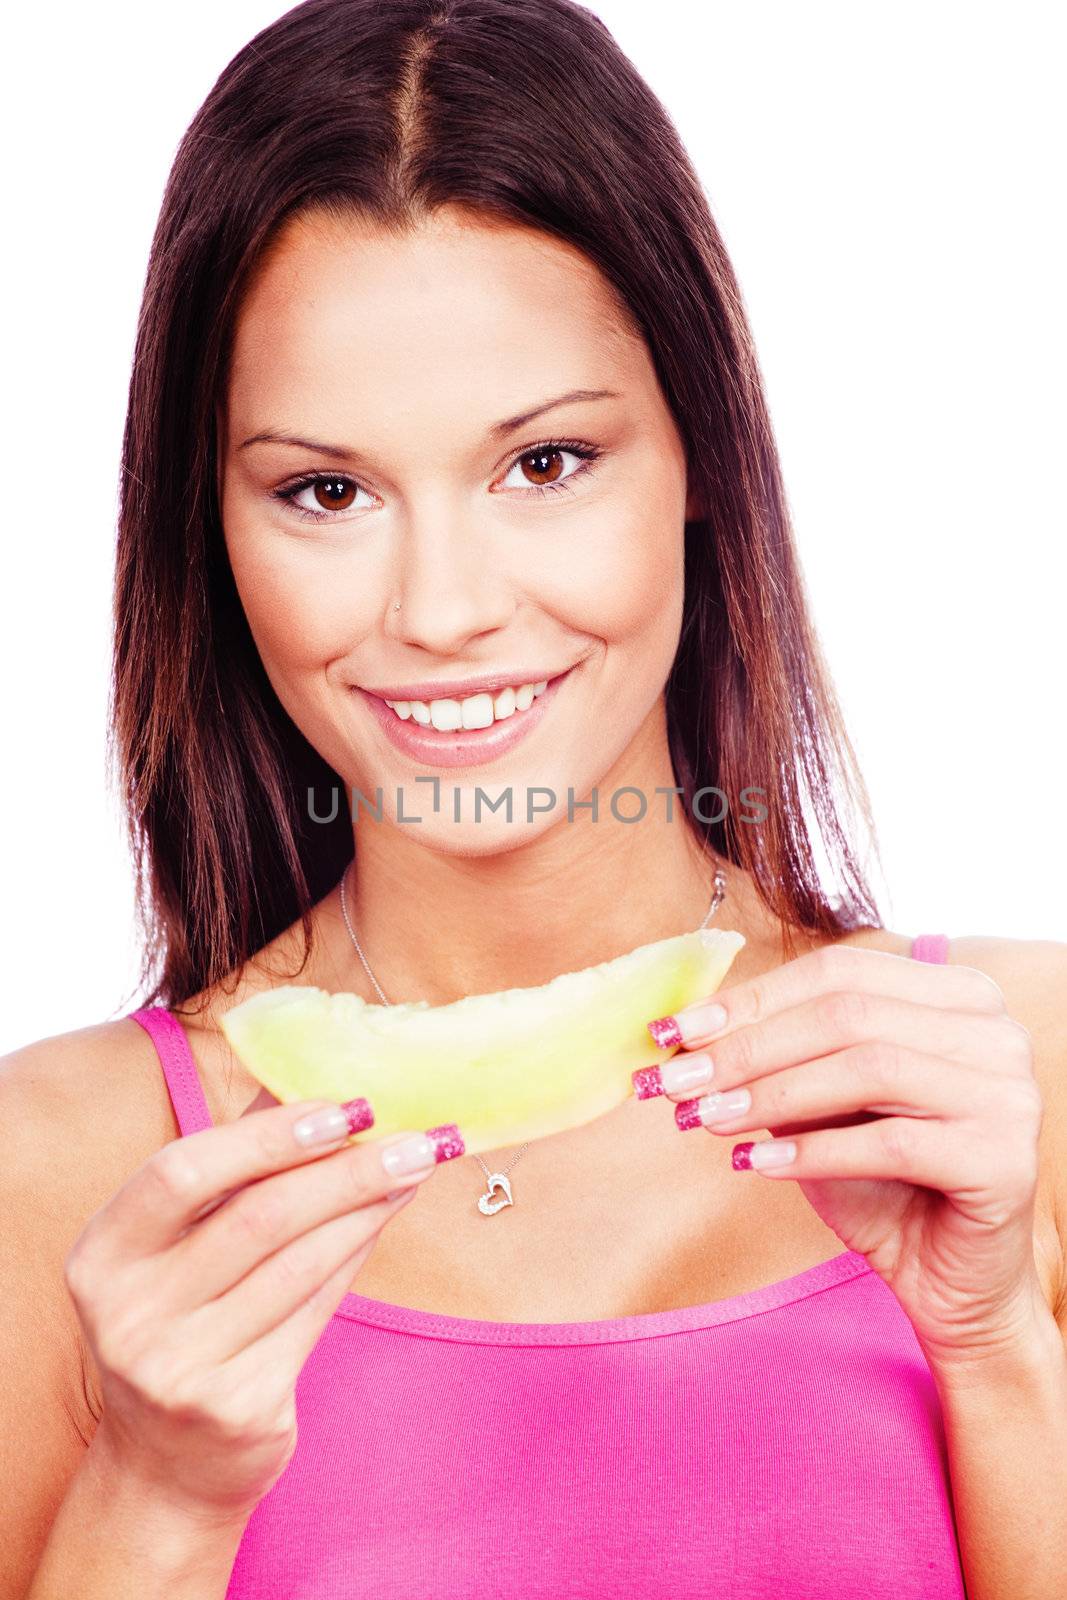 Young woman holding slice of yellow melon, isolated on white background